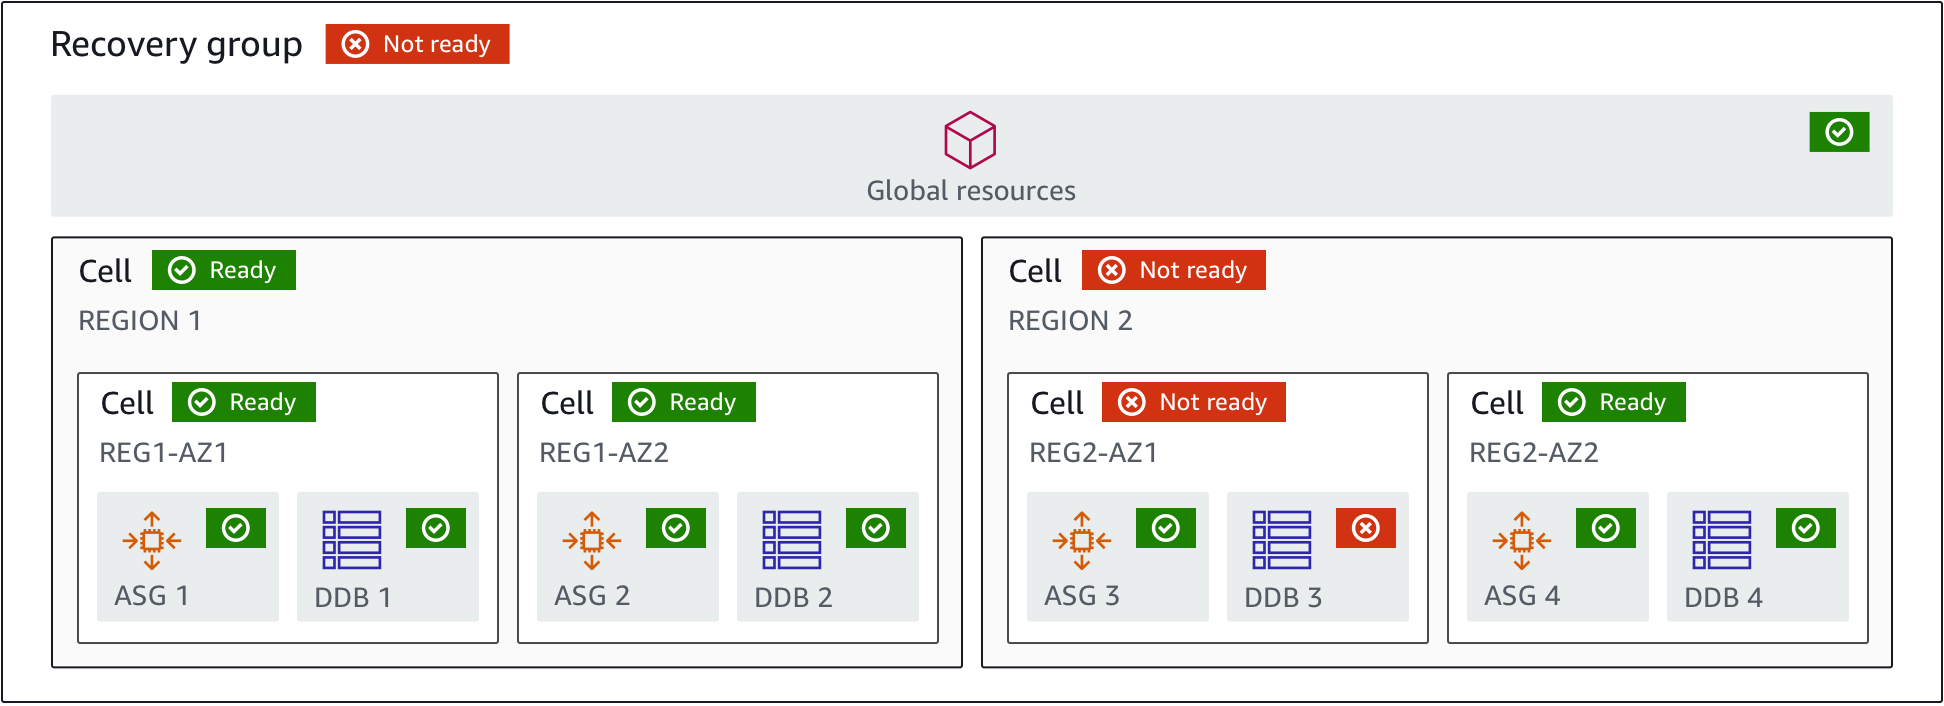 
					A sample recovery group for Route 53 ARC. It has two cells, by Region, and 
						 within each Region, there are 2 nested cells, by Availability Zone. The first
						 Region cell has all ready statuses and the second Region cell has a not
						 ready status because one of its zone cells is not ready. The recovery group
						 is overall not ready.
				